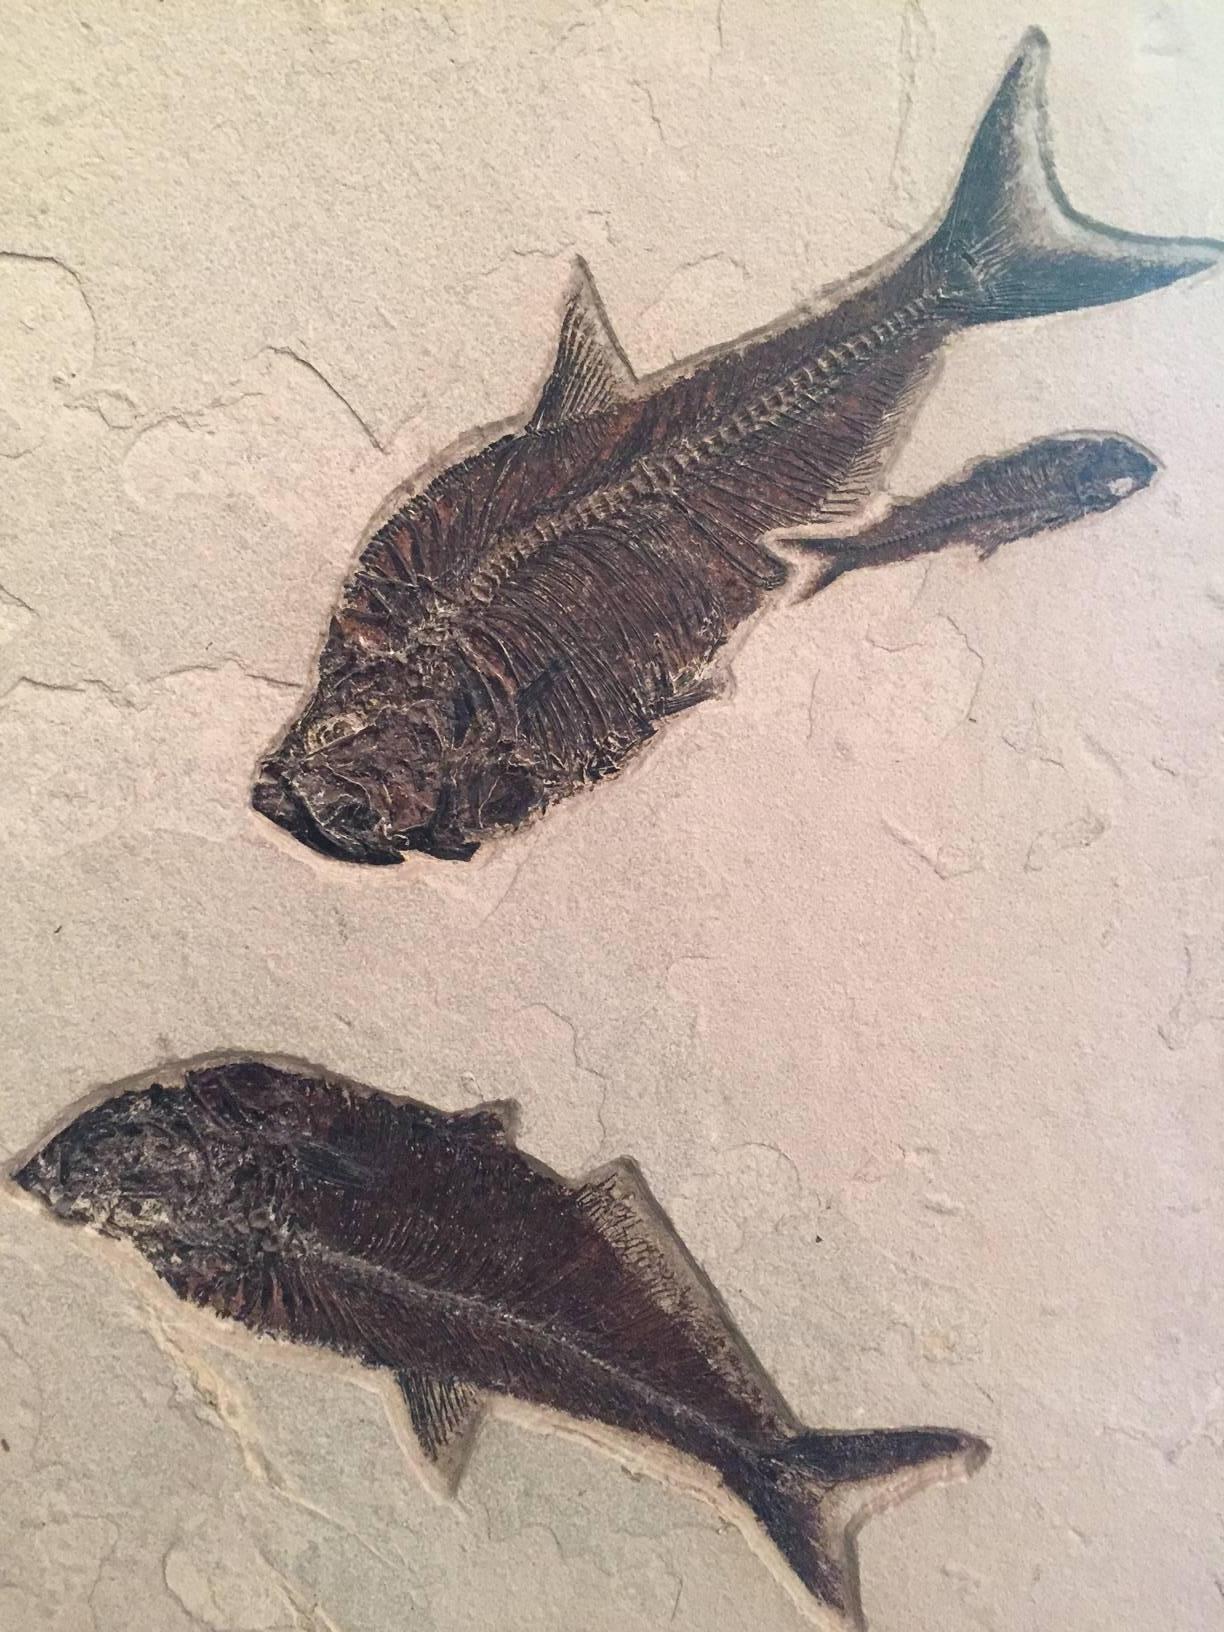 Very large and complete eocene fossil of a group of fish. Earthed from the Green River Formation in Wyoming, this piece is between 34-56 million years old.